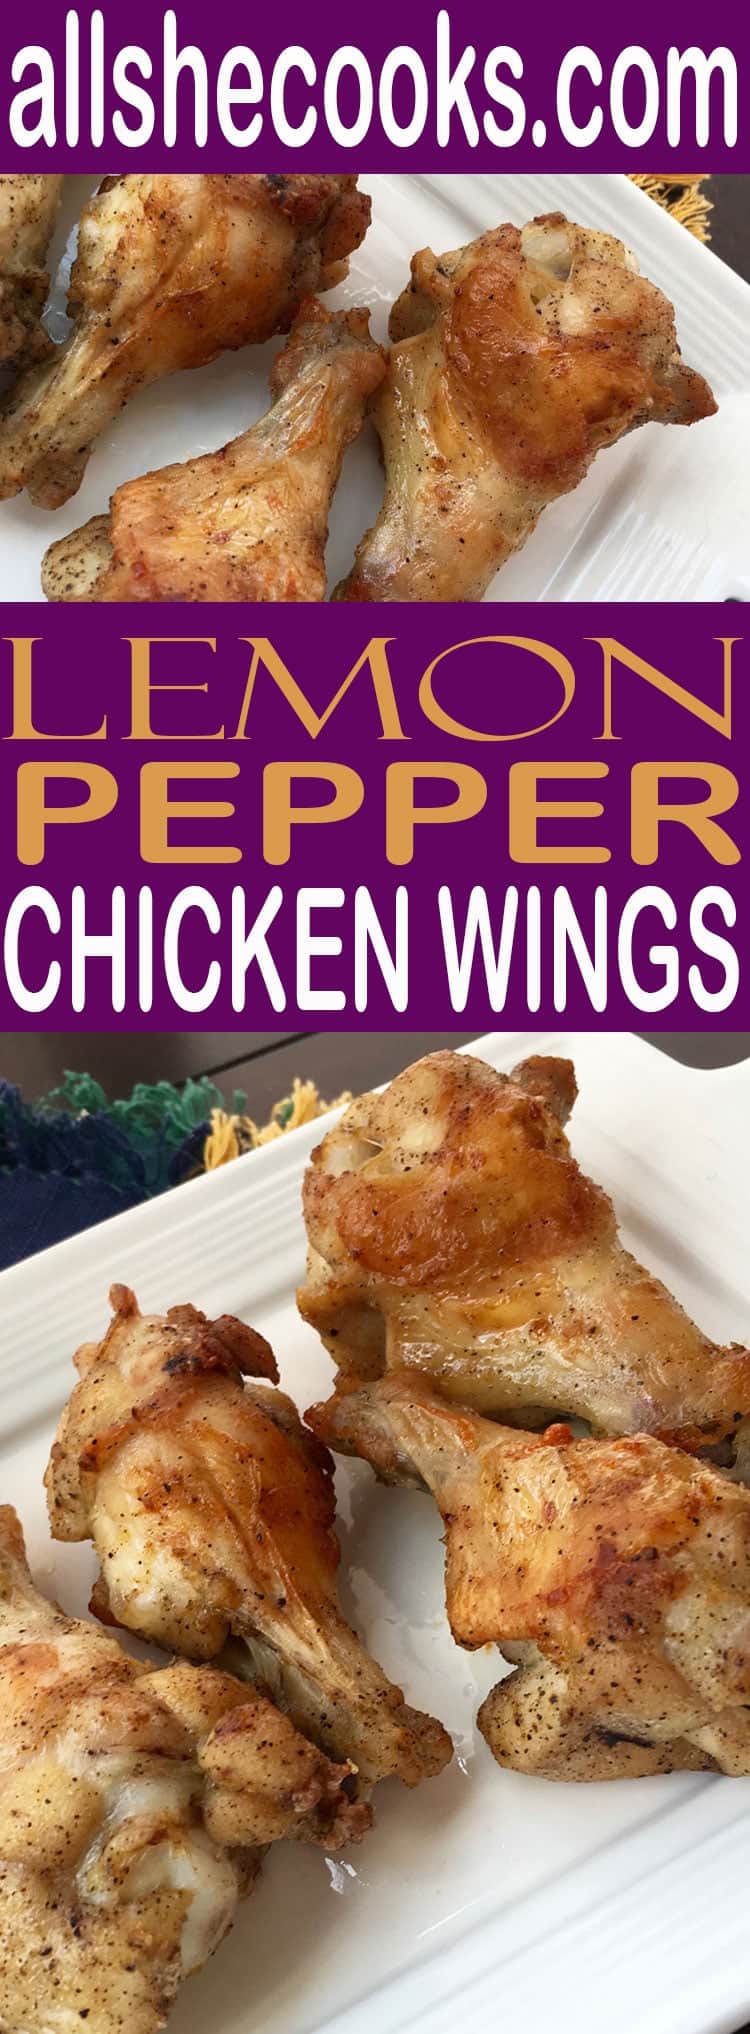 Once you try this tasty lemon pepper seasoning for our Lemon Pepper Chicken Wings you will wonder why you haven't tried it before. It is just that good. Great for an easy dinner for baked chicken wings.